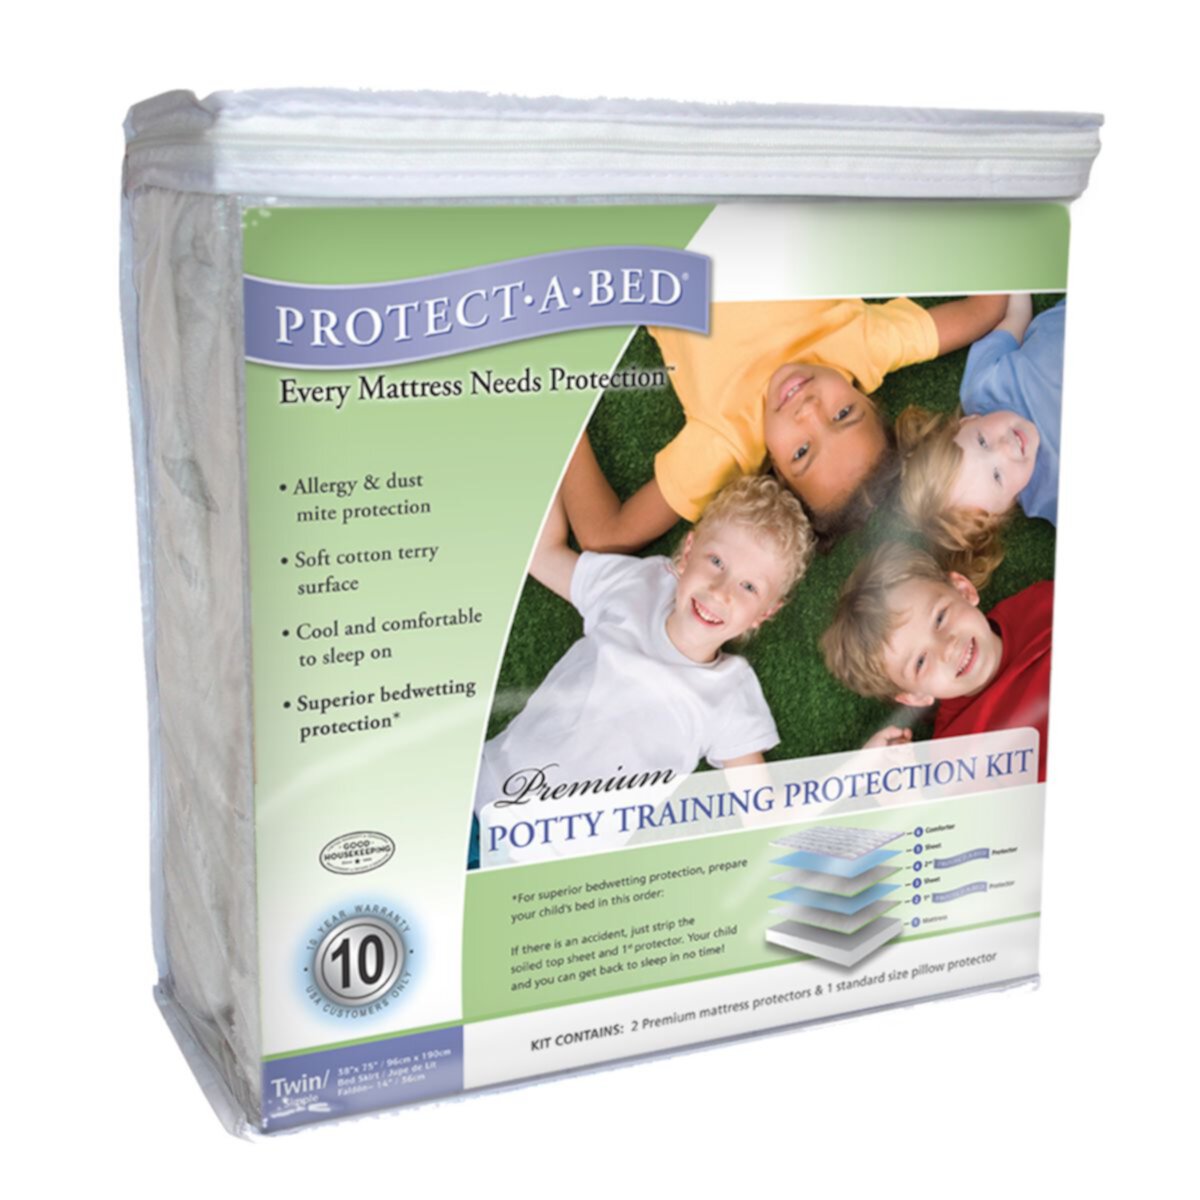 Protect-A-Bed Potty Training Protection Kit - Twin Protect-A-Bed